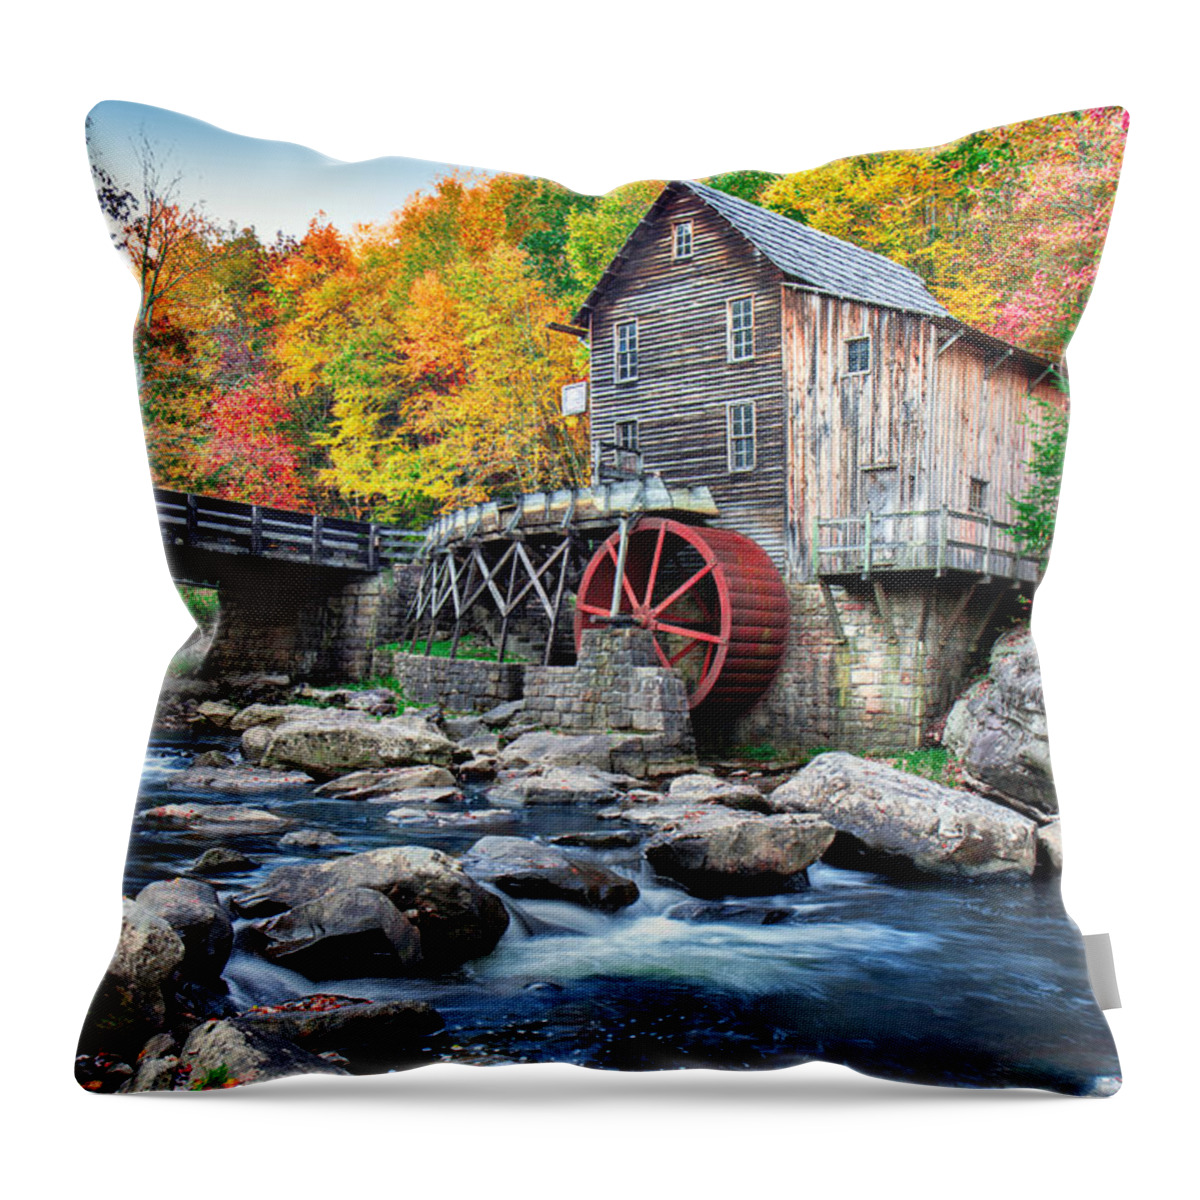 Babcock State Park Throw Pillow featuring the photograph Glade Creek Grist Mill by Mary Almond